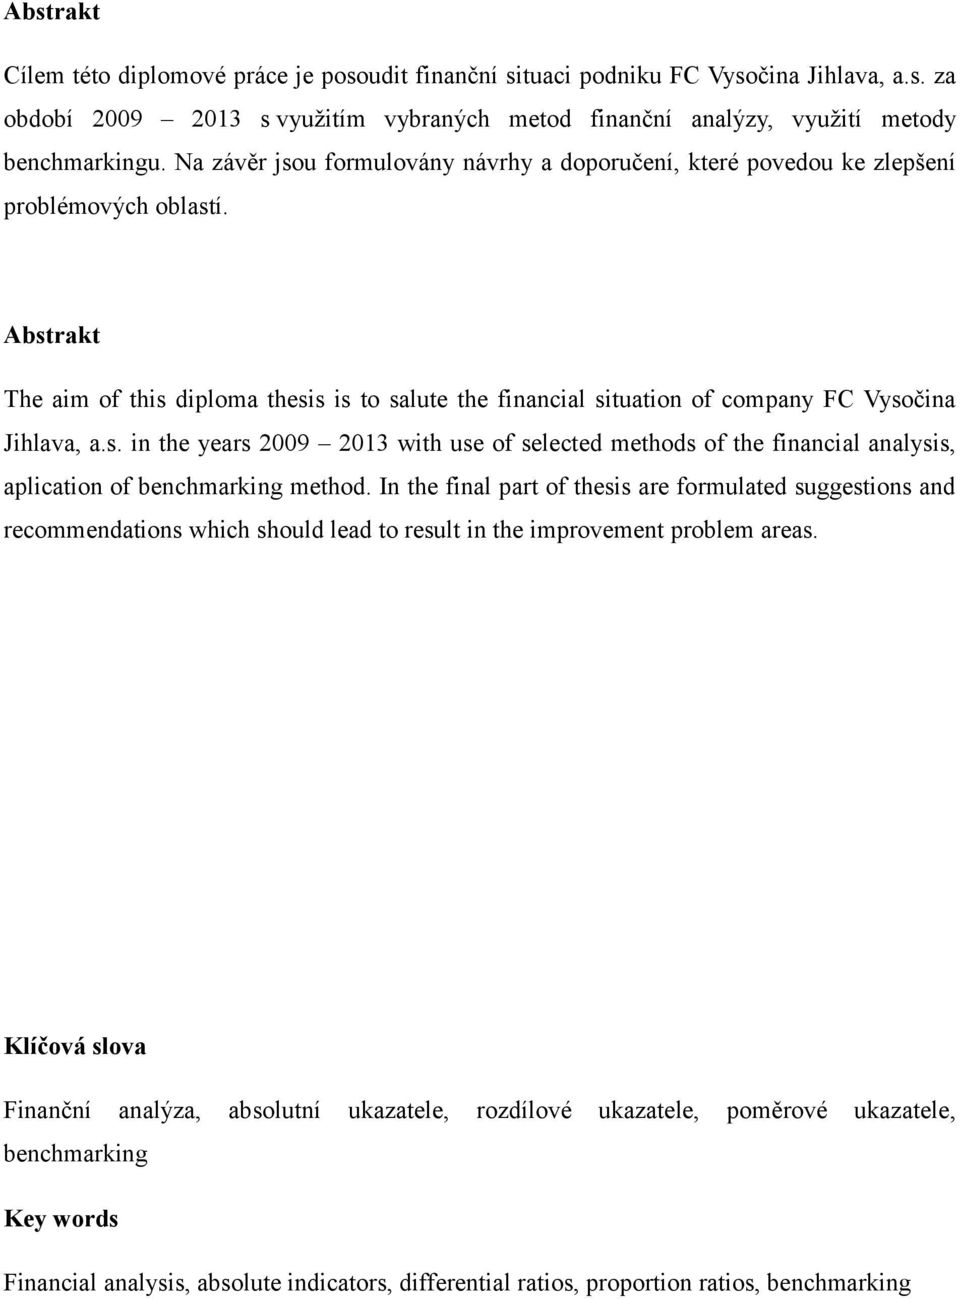 Abstrakt The aim of this diploma thesis is to salute the financial situation of company FC Vysočina Jihlava, a.s. in the years 2009 2013 with use of selected methods of the financial analysis, aplication of benchmarking method.